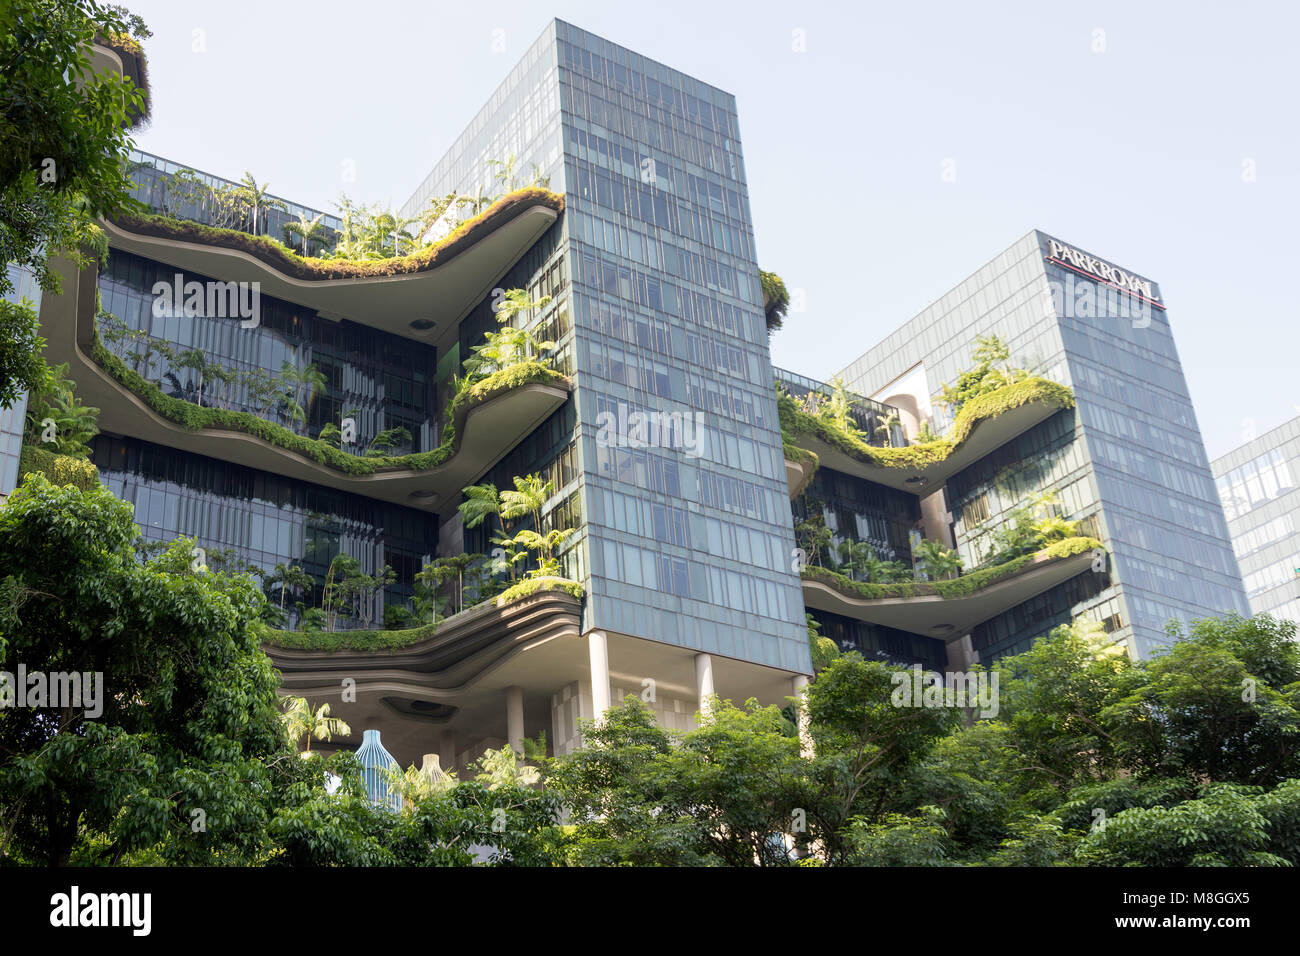 Vertical garden on levels of Parkroyal on Pickering Hotel, Upper Pickering Street, Chinatown, Outram District, Central Area, Singapore Stock Photo